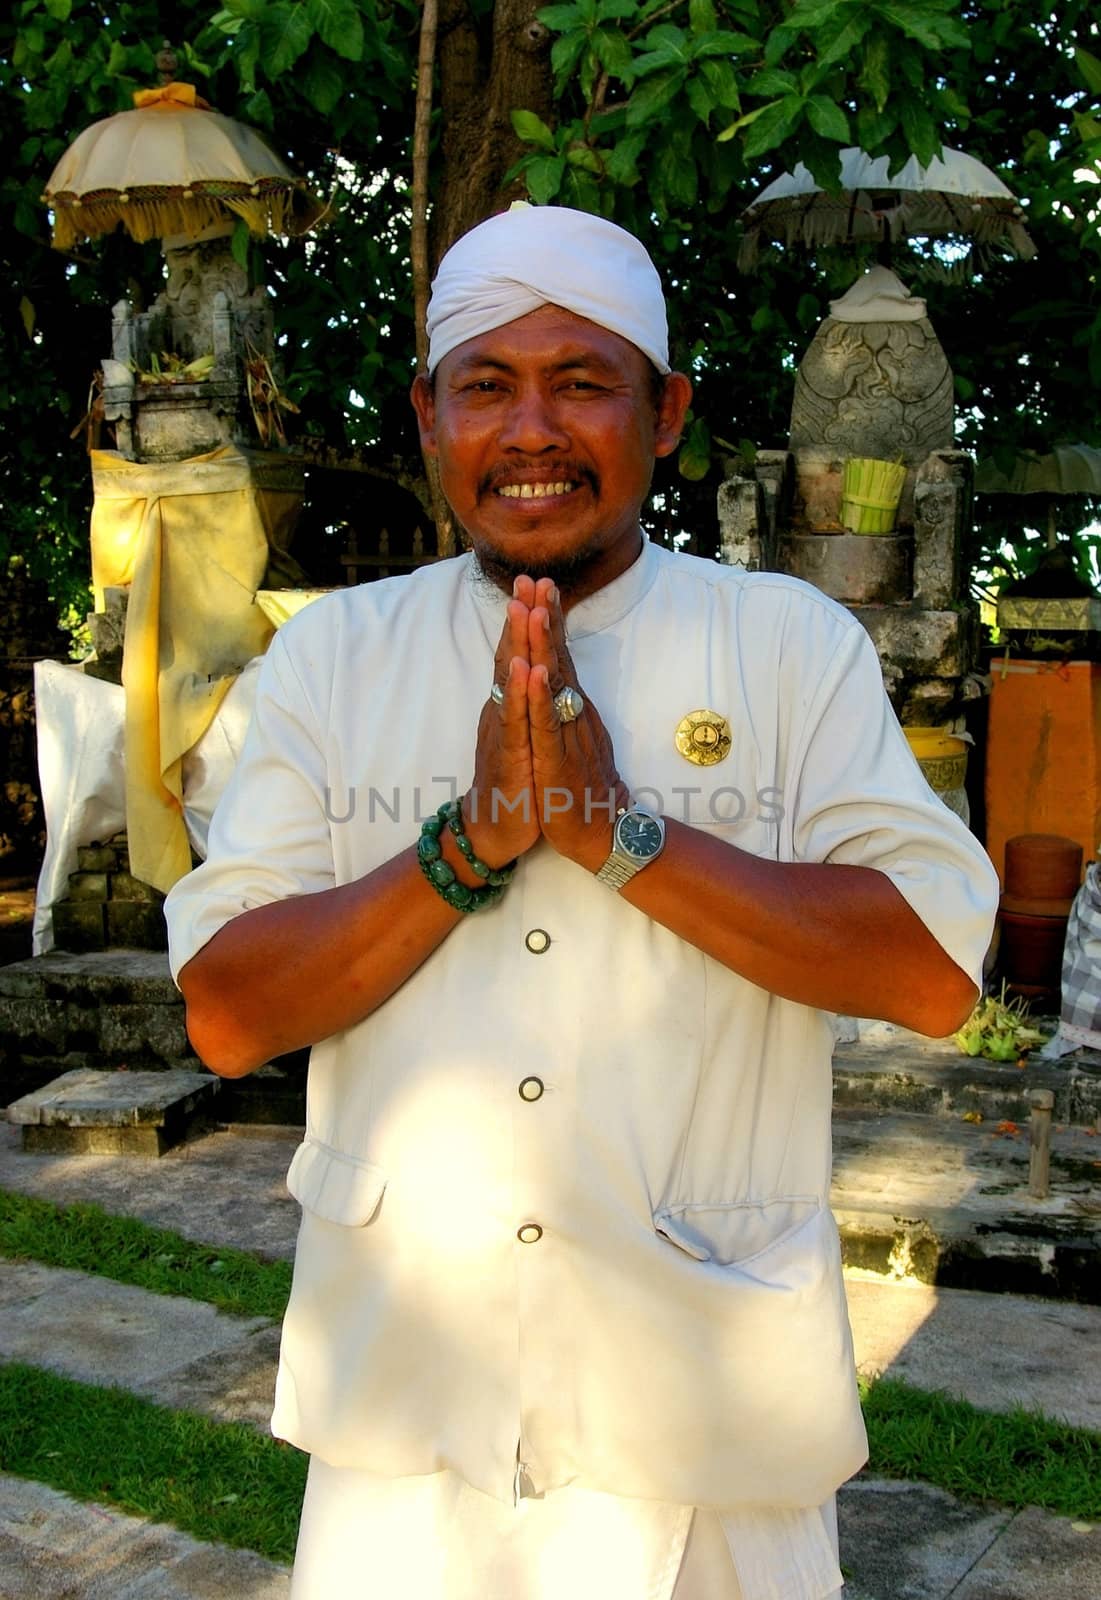 A Balinese man wearing traditional attire, at a temple in Nusa Dua, Bali, Indonesia.